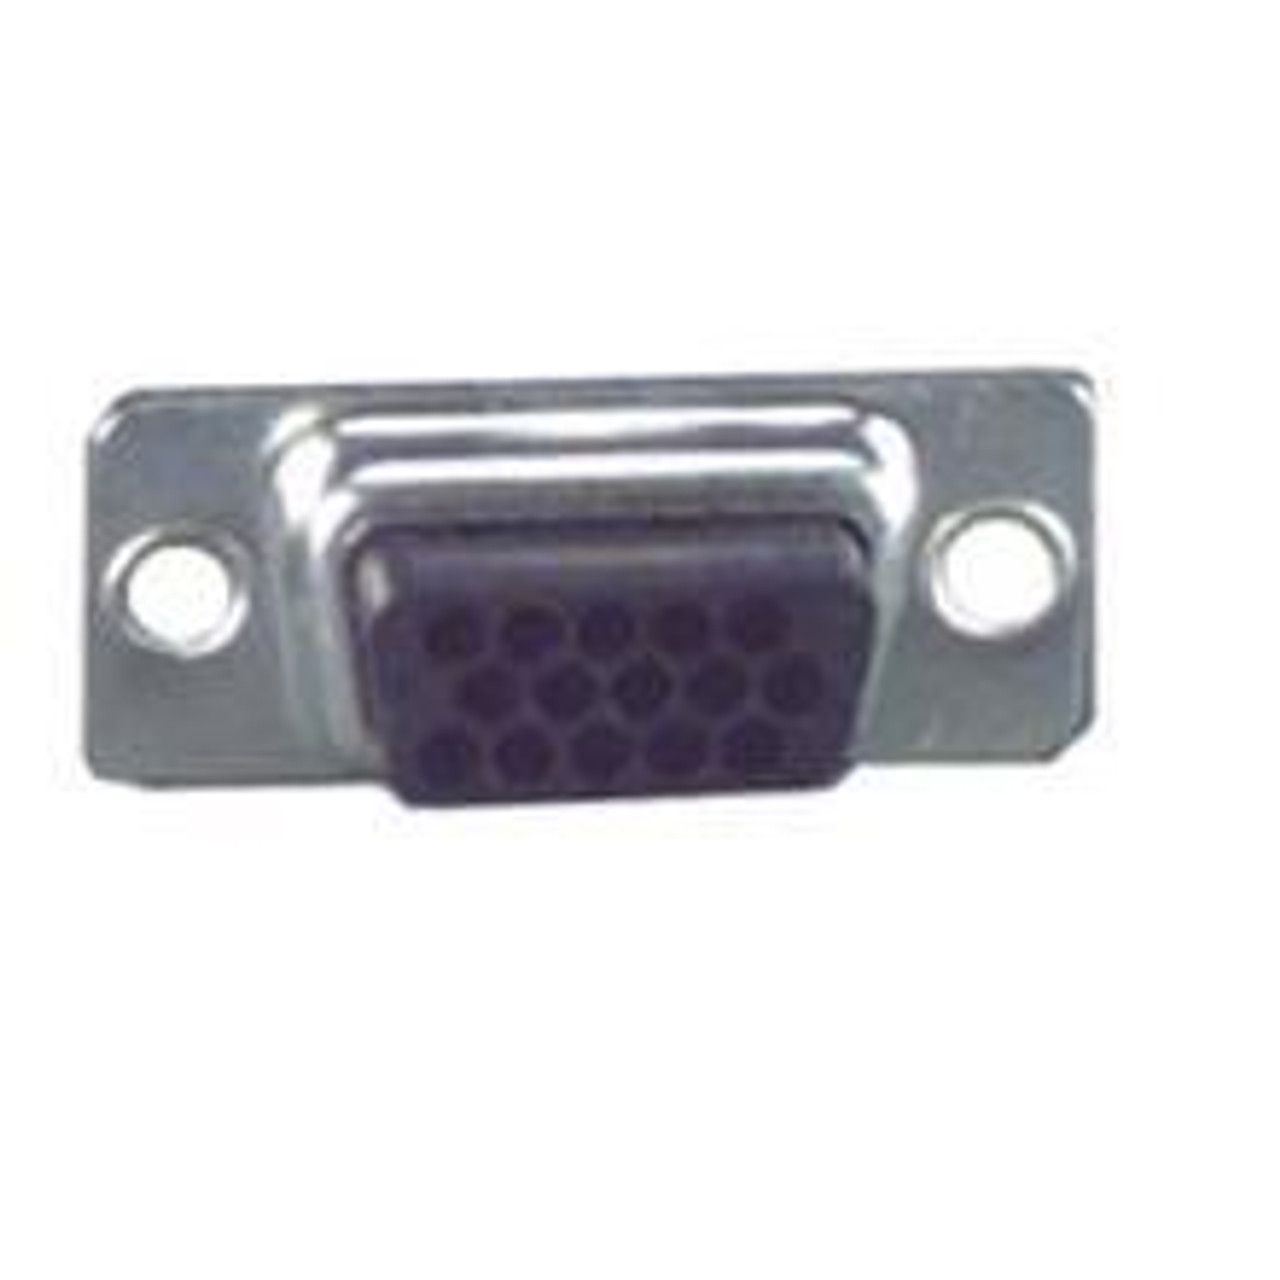 DB15F Crimp Pin Housing (Sell by bag of 10)